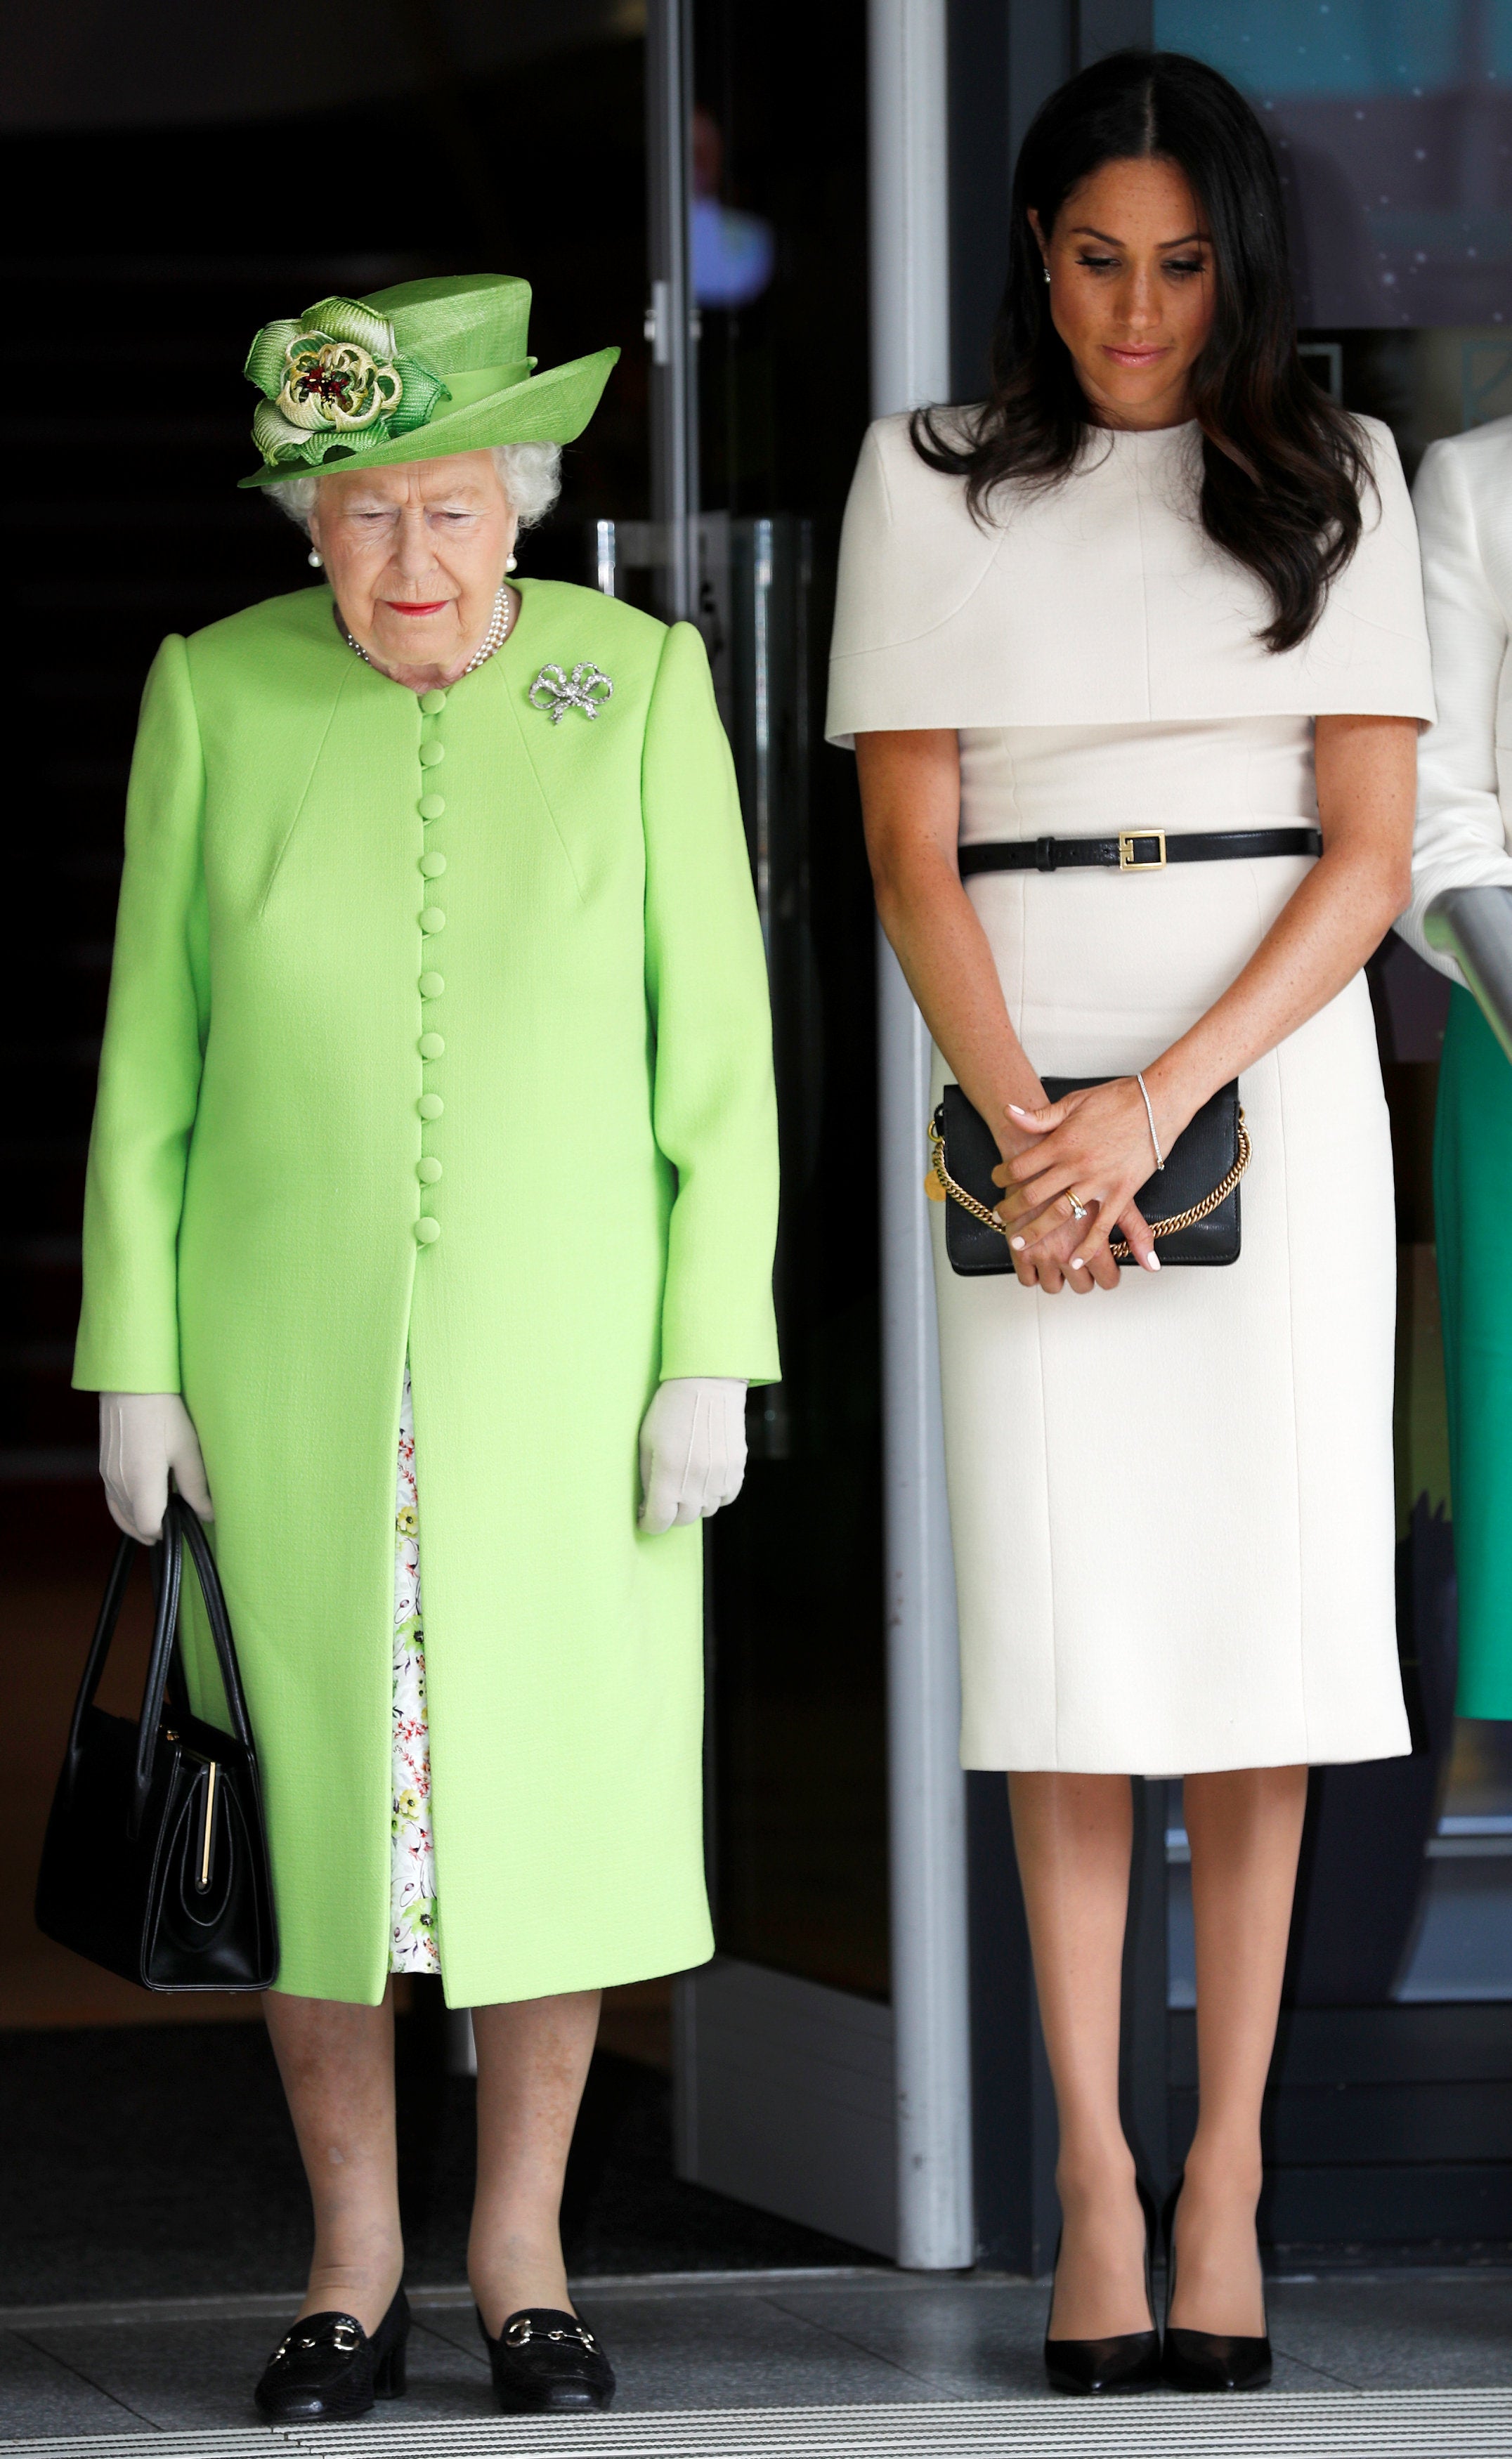 Meghan attended the event with the Queen.